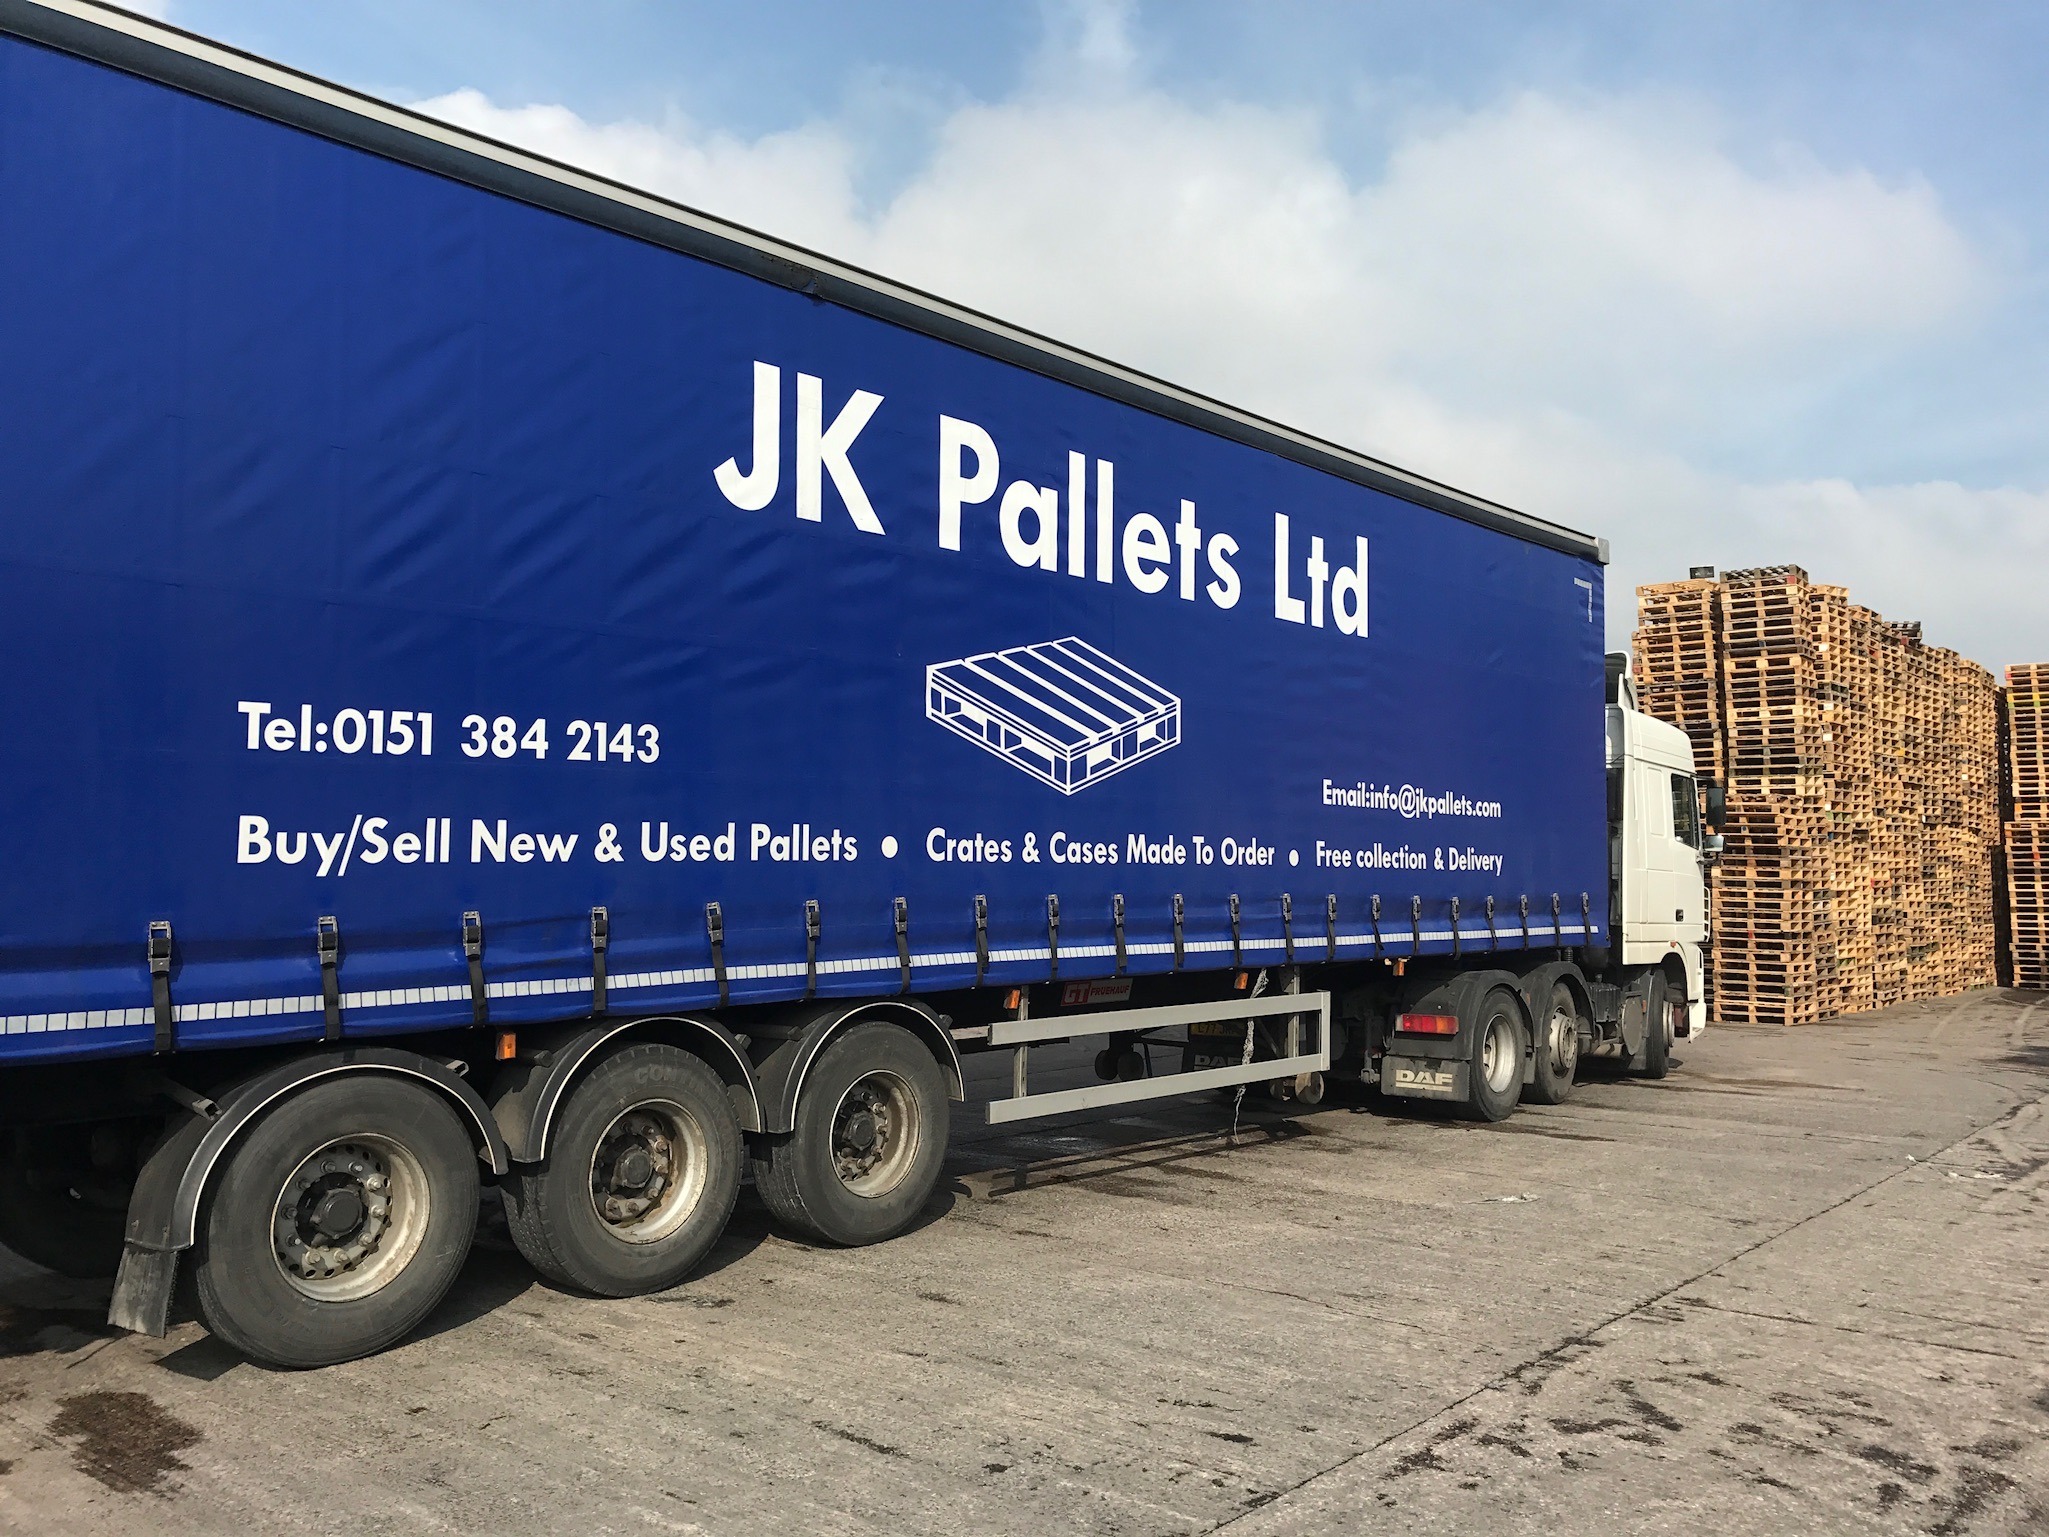 New Vs Used Pallets: Which Option Is Right for Your Business?